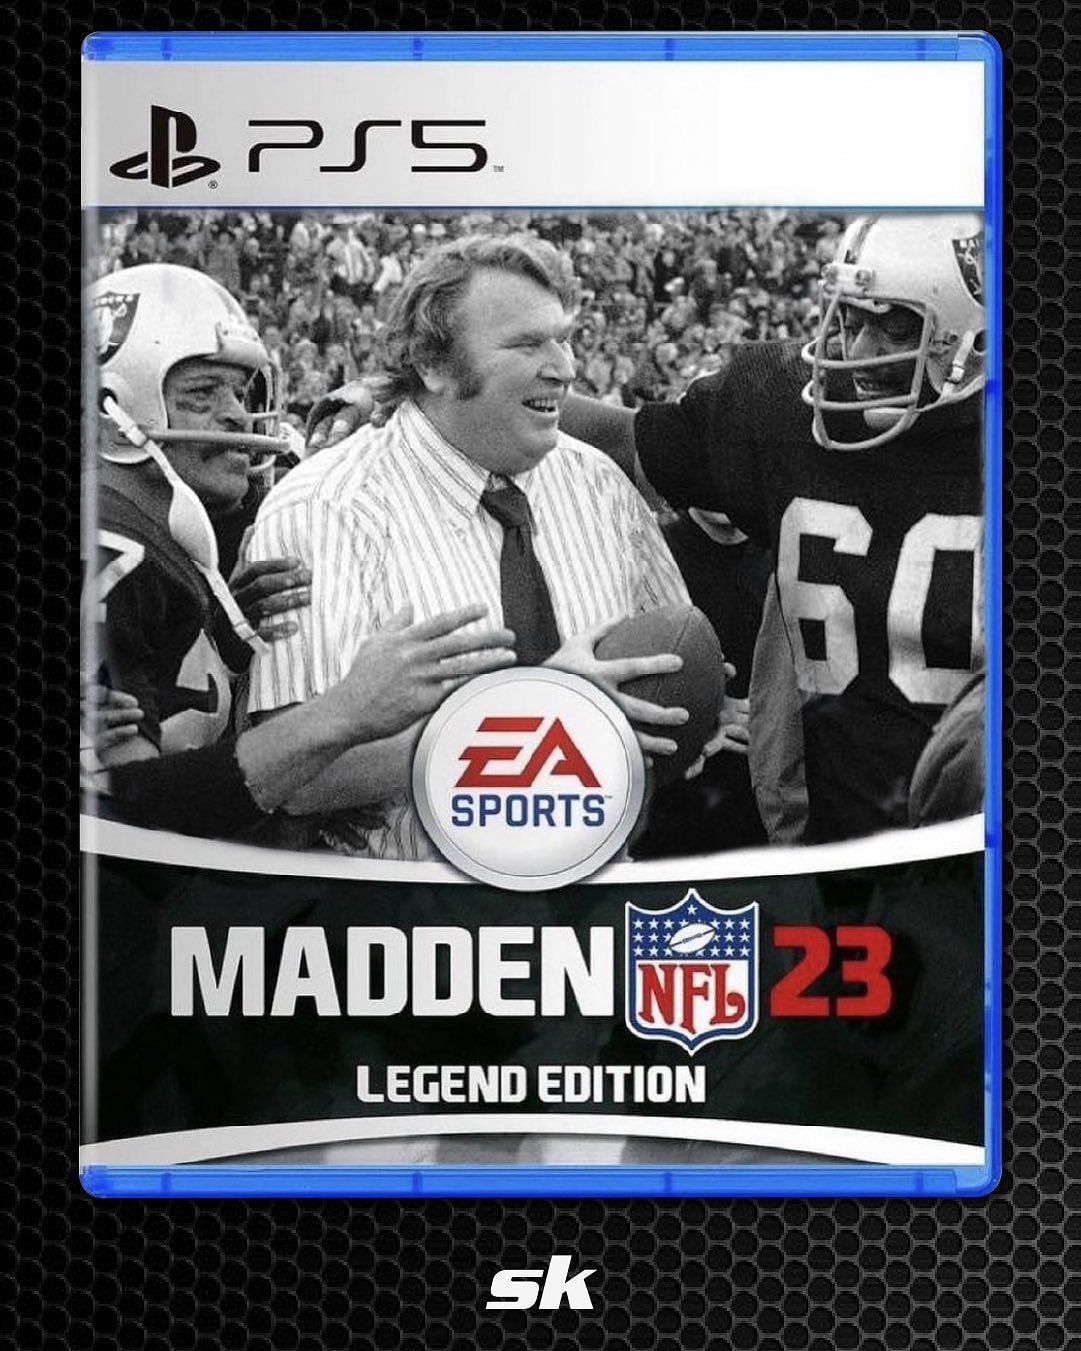 madden 23 who's on the cover